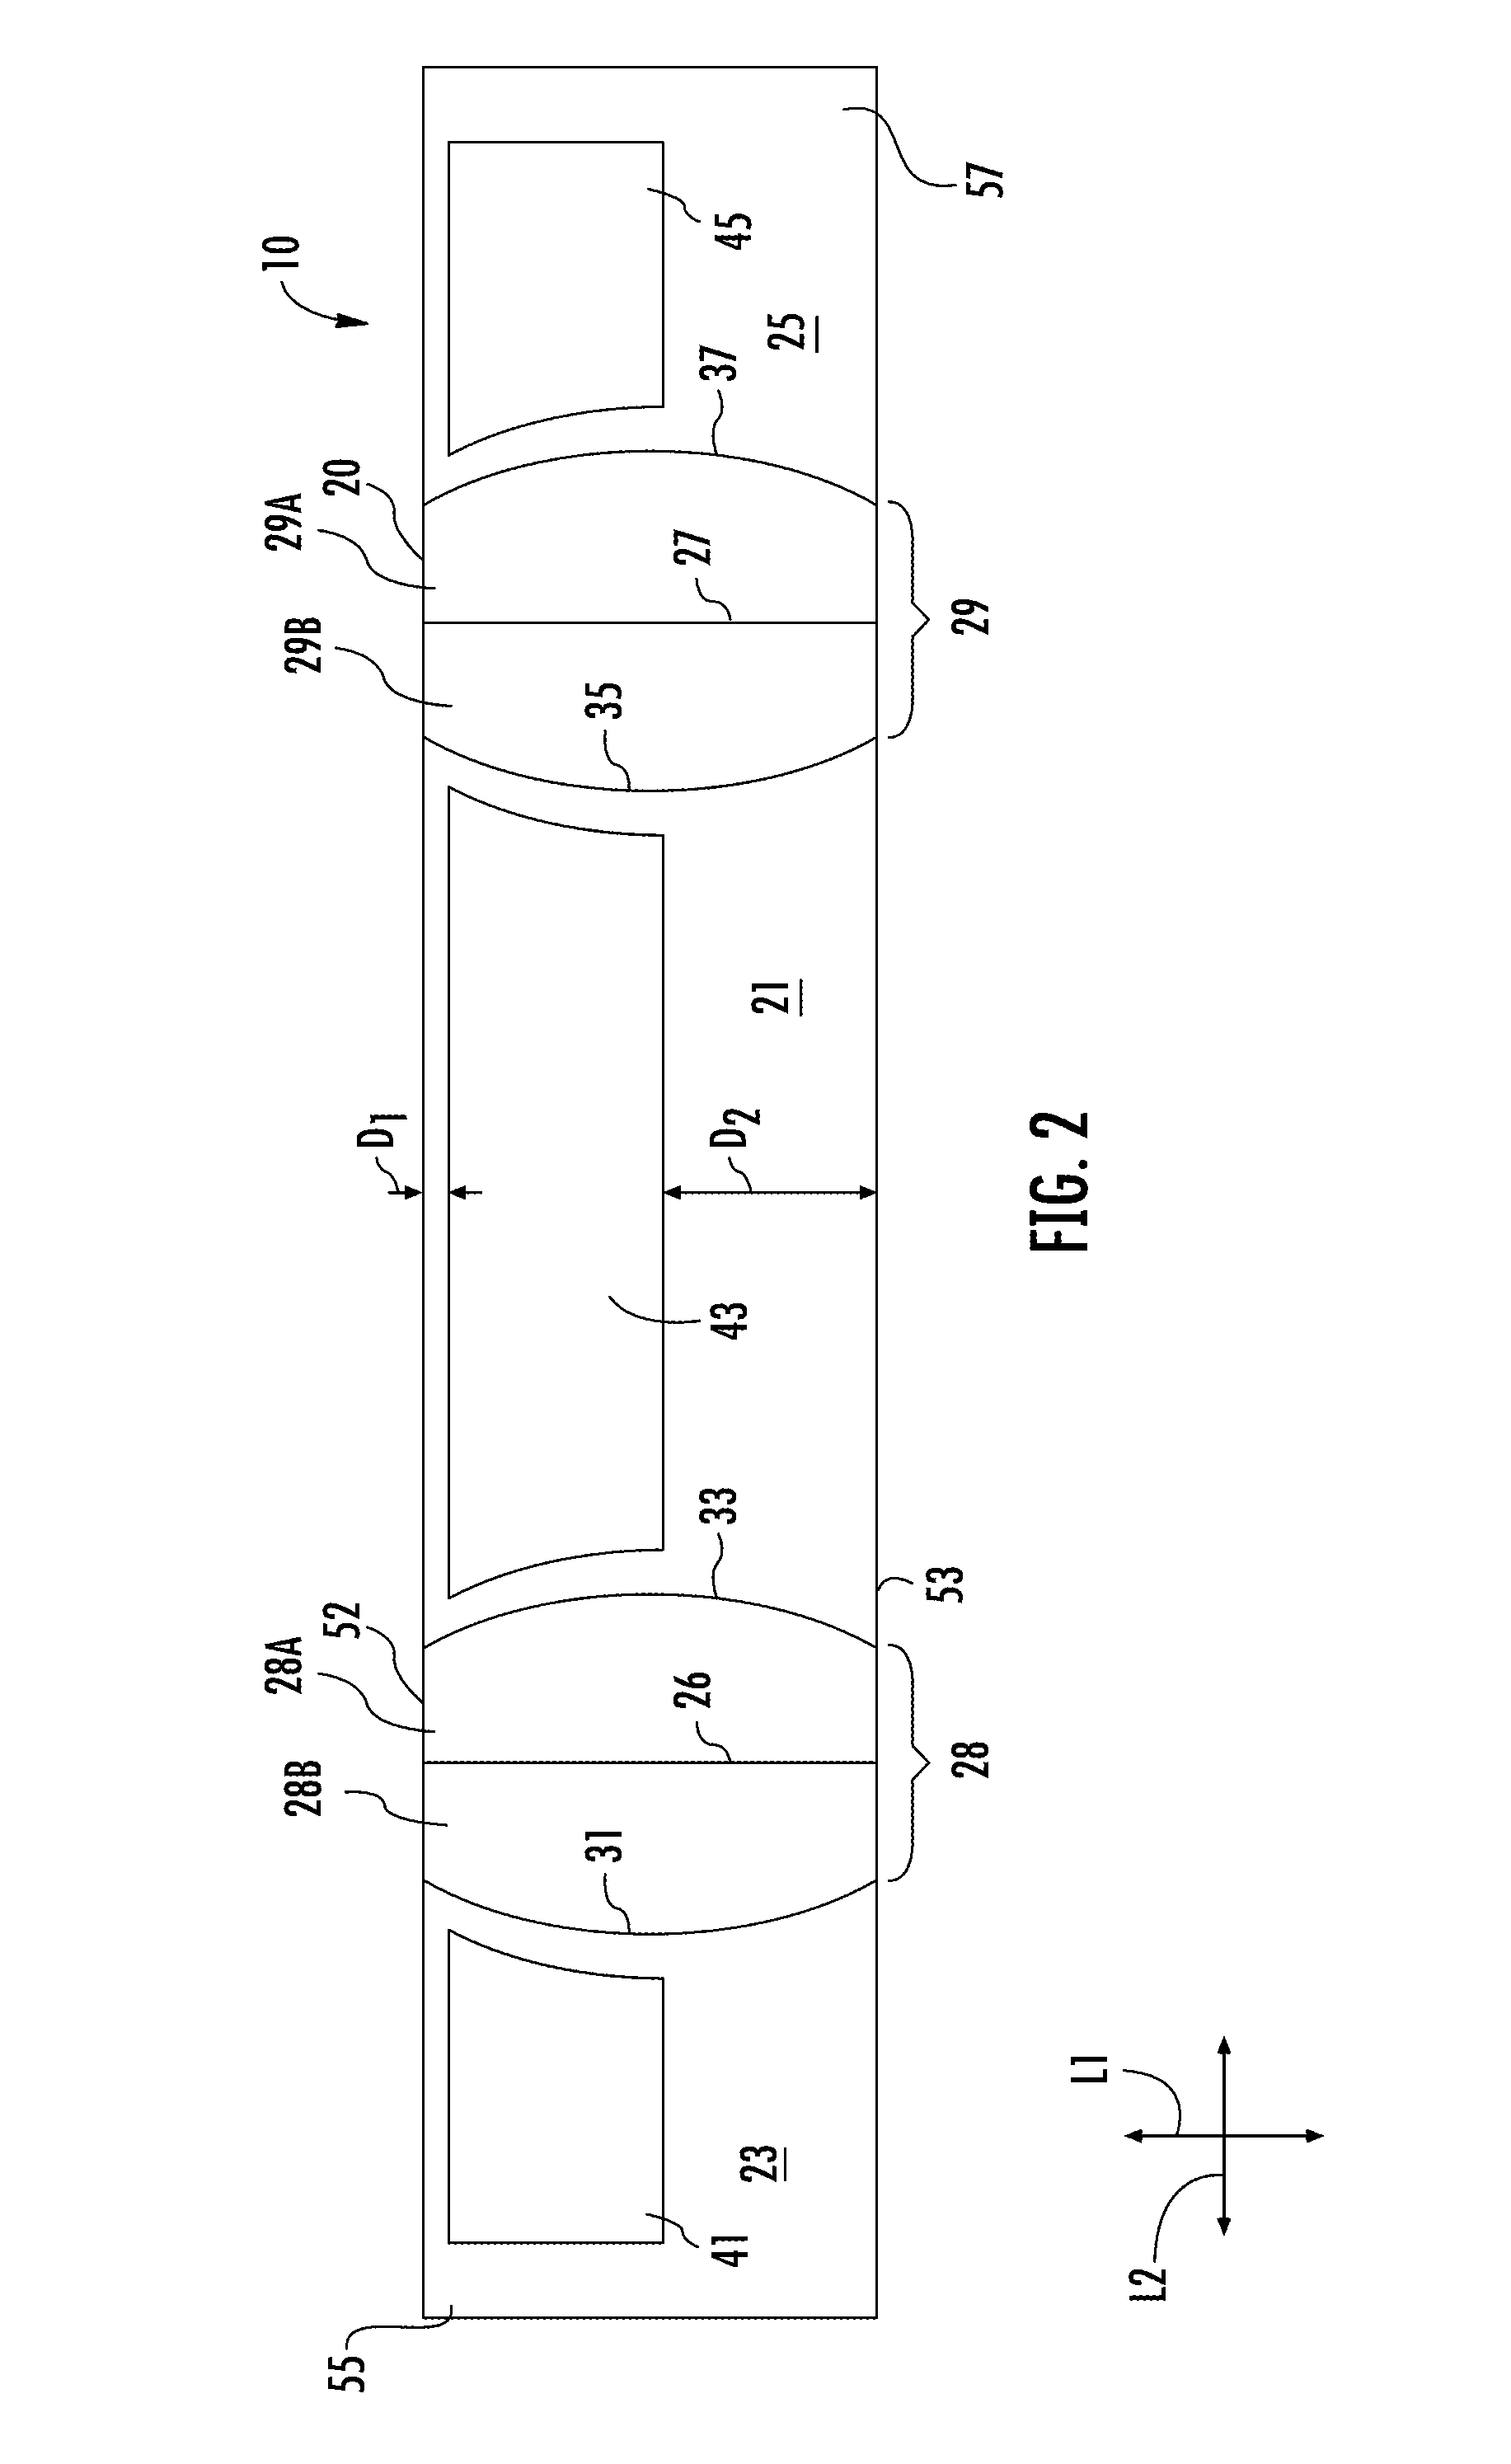 Method and system for forming packages